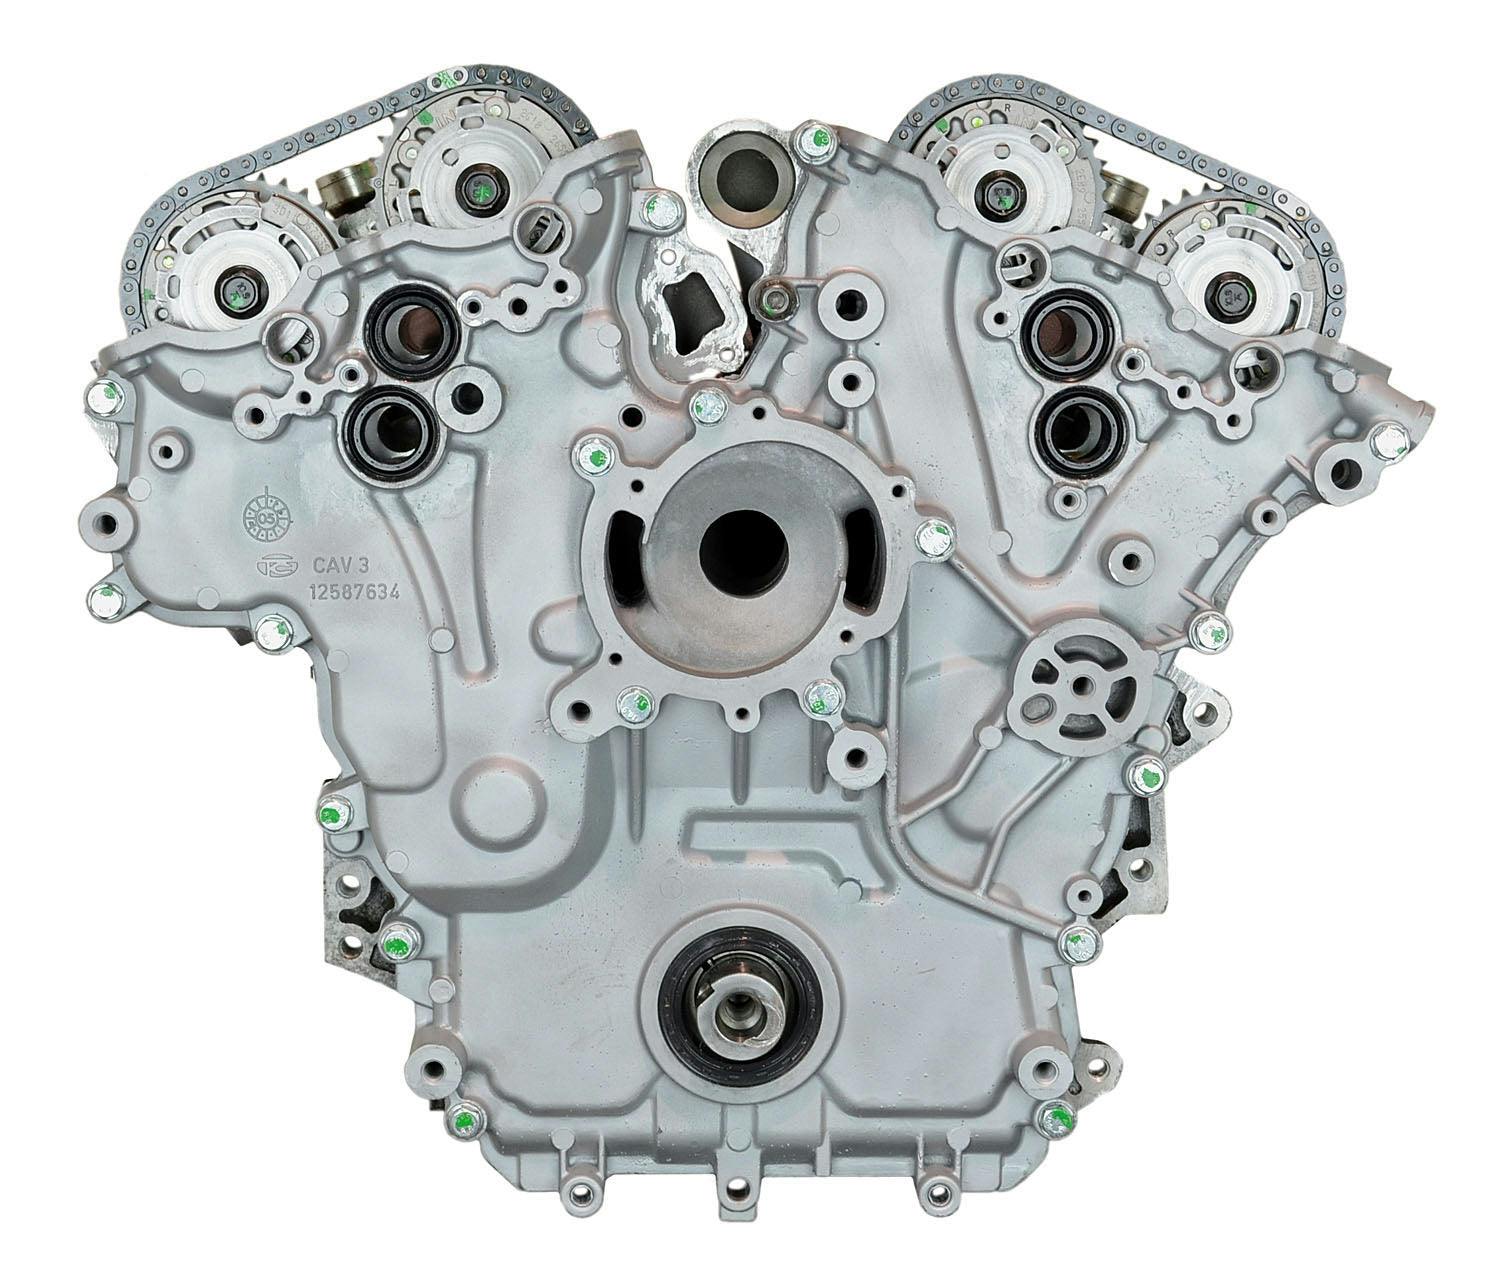 3.6L V6 Engine for 2004-2006 Cadillac CTS/SRX/STS